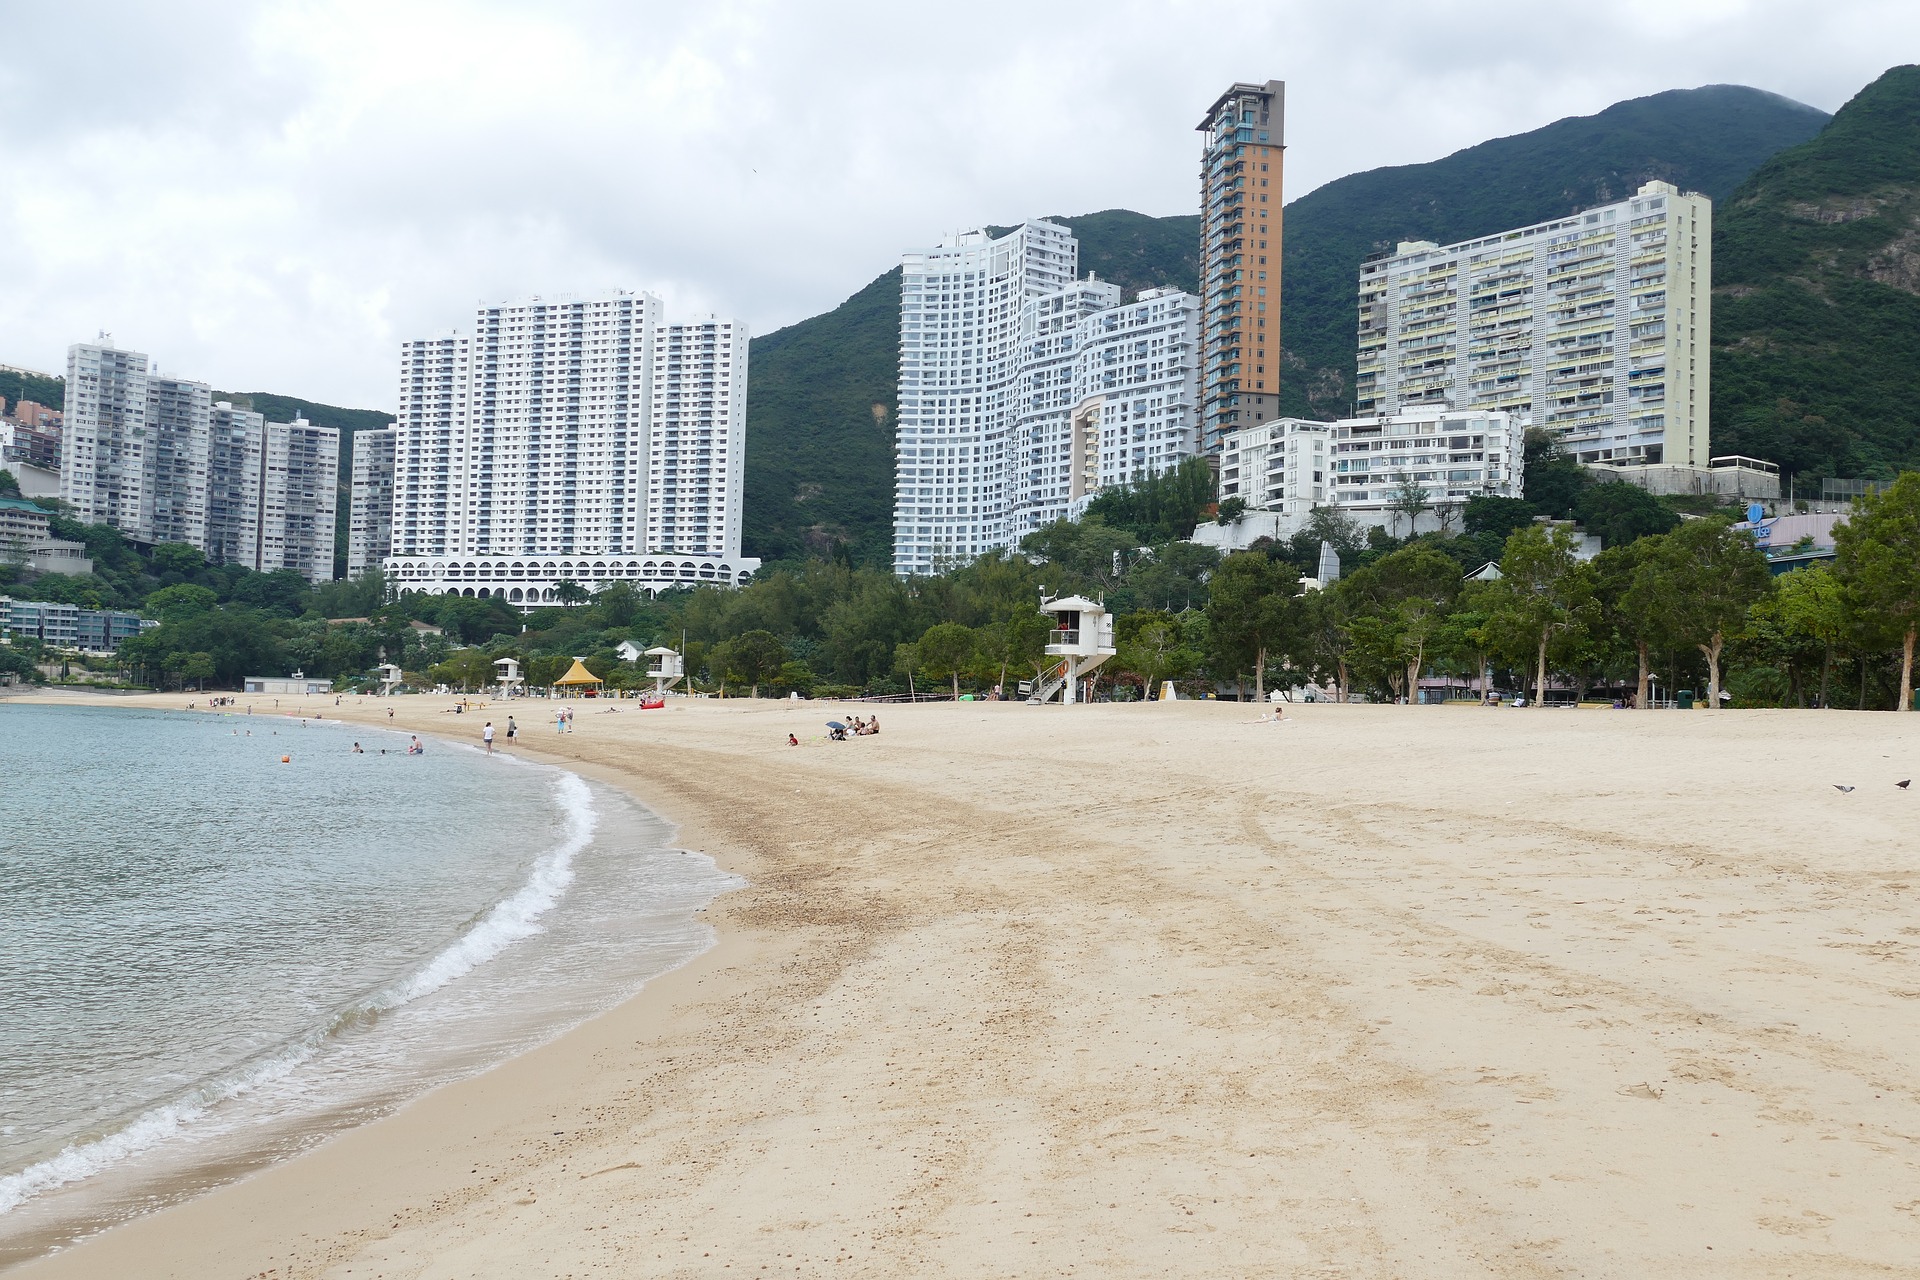 beachfront cove in hong kong with skyscrapers and jungle in the background